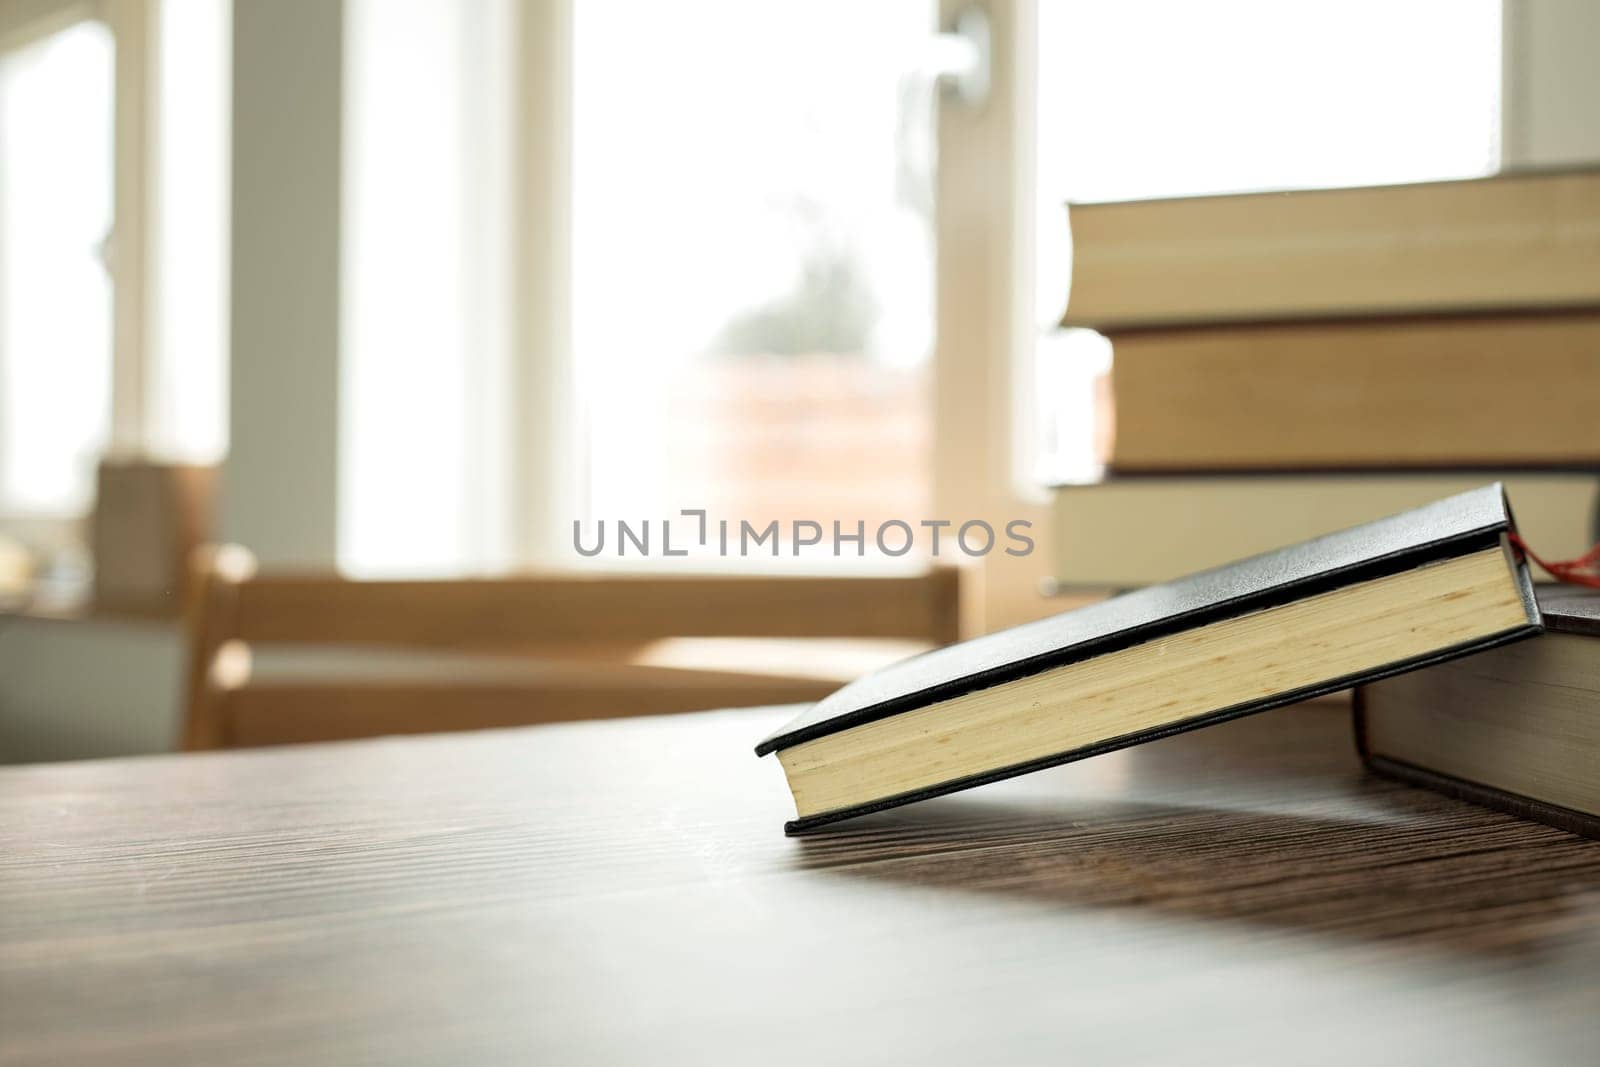 Education learning concept with opening book or textbook at home in office room, stack piles of literature text academic archive on reading desk and aisle of bookshelves in school study class room background interior student